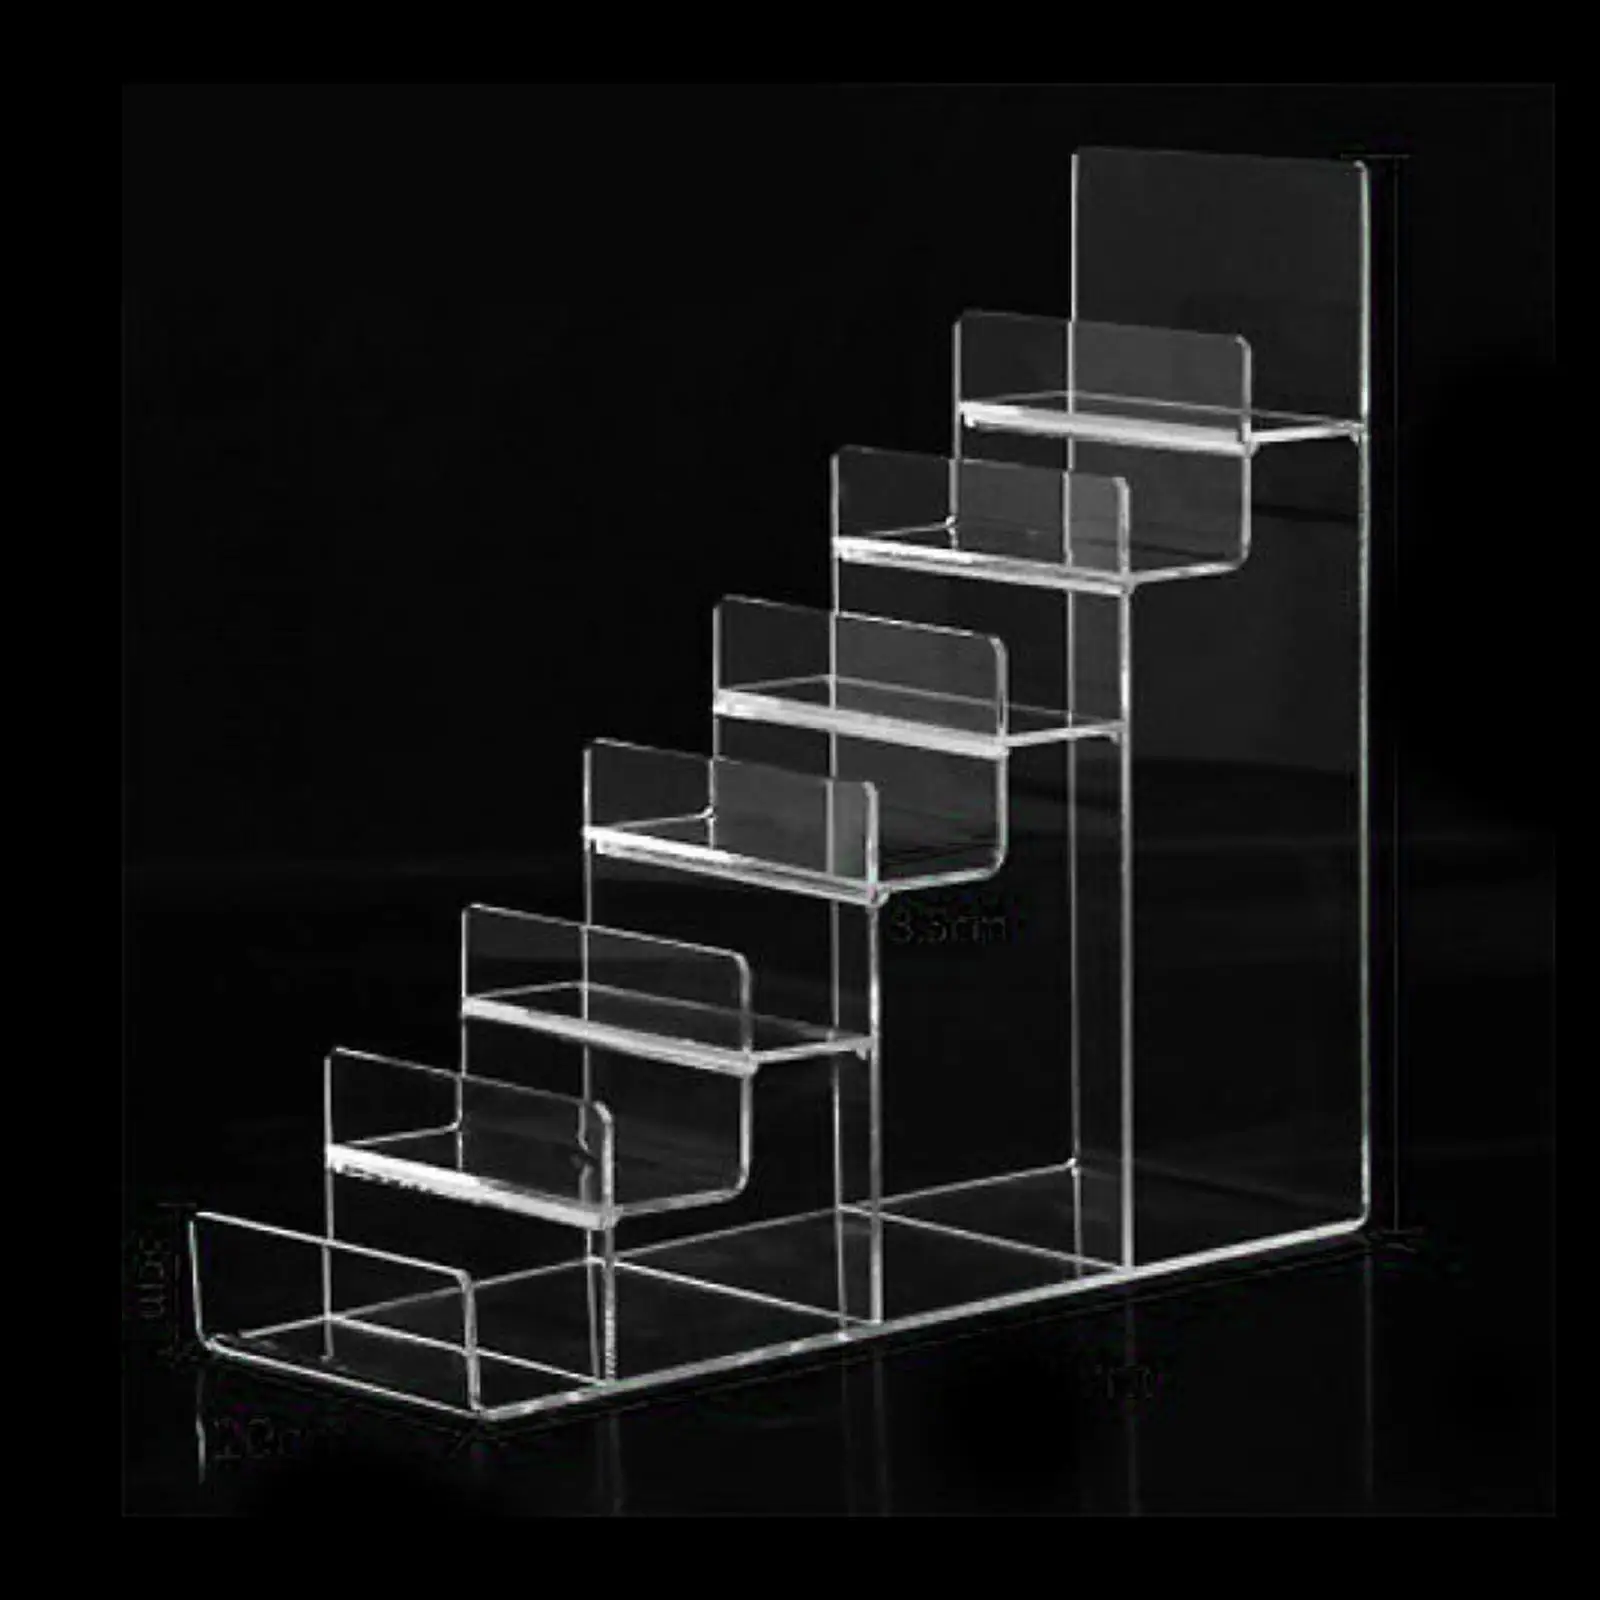 Clear Acrylic Jewelry Display Riser Shelf Organizer Showcase Fixtures for Mobile Glasses Figures Cosmetic Retail/Shop